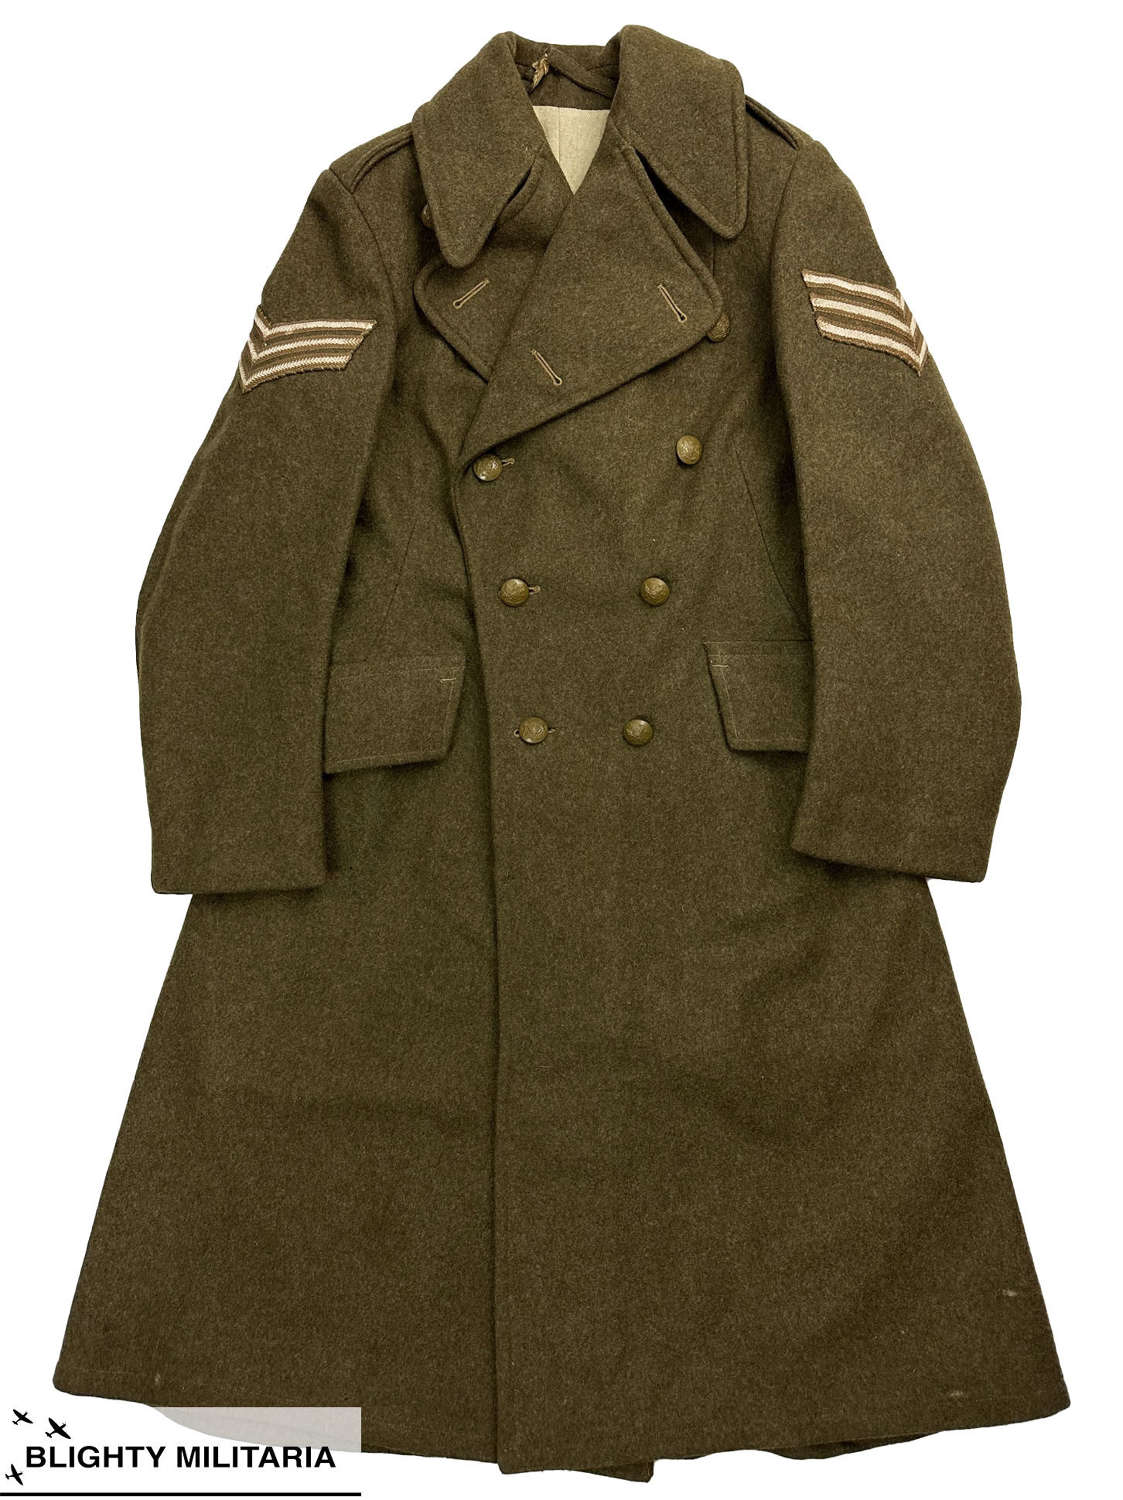 Original 1945 Dated 1941 Pattern ATS Greatcoat - Size 14